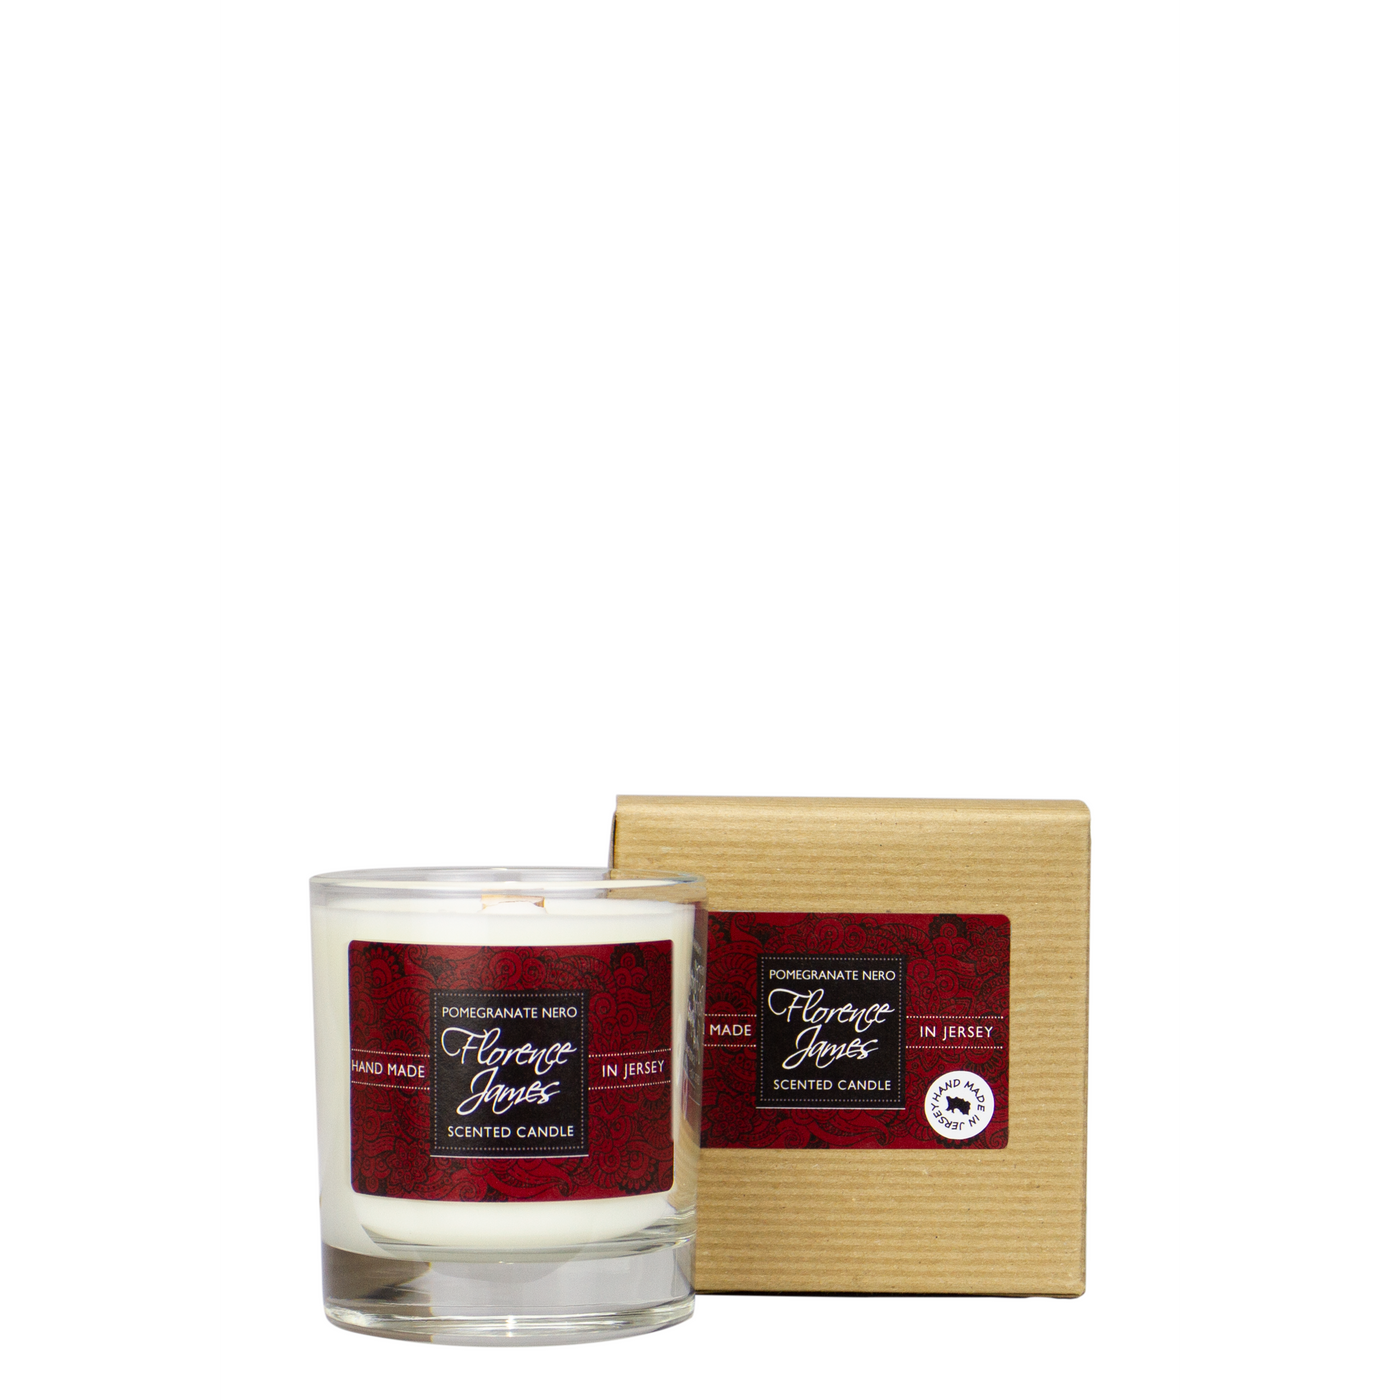 Florence James Scented Candle Pomegranate Nero